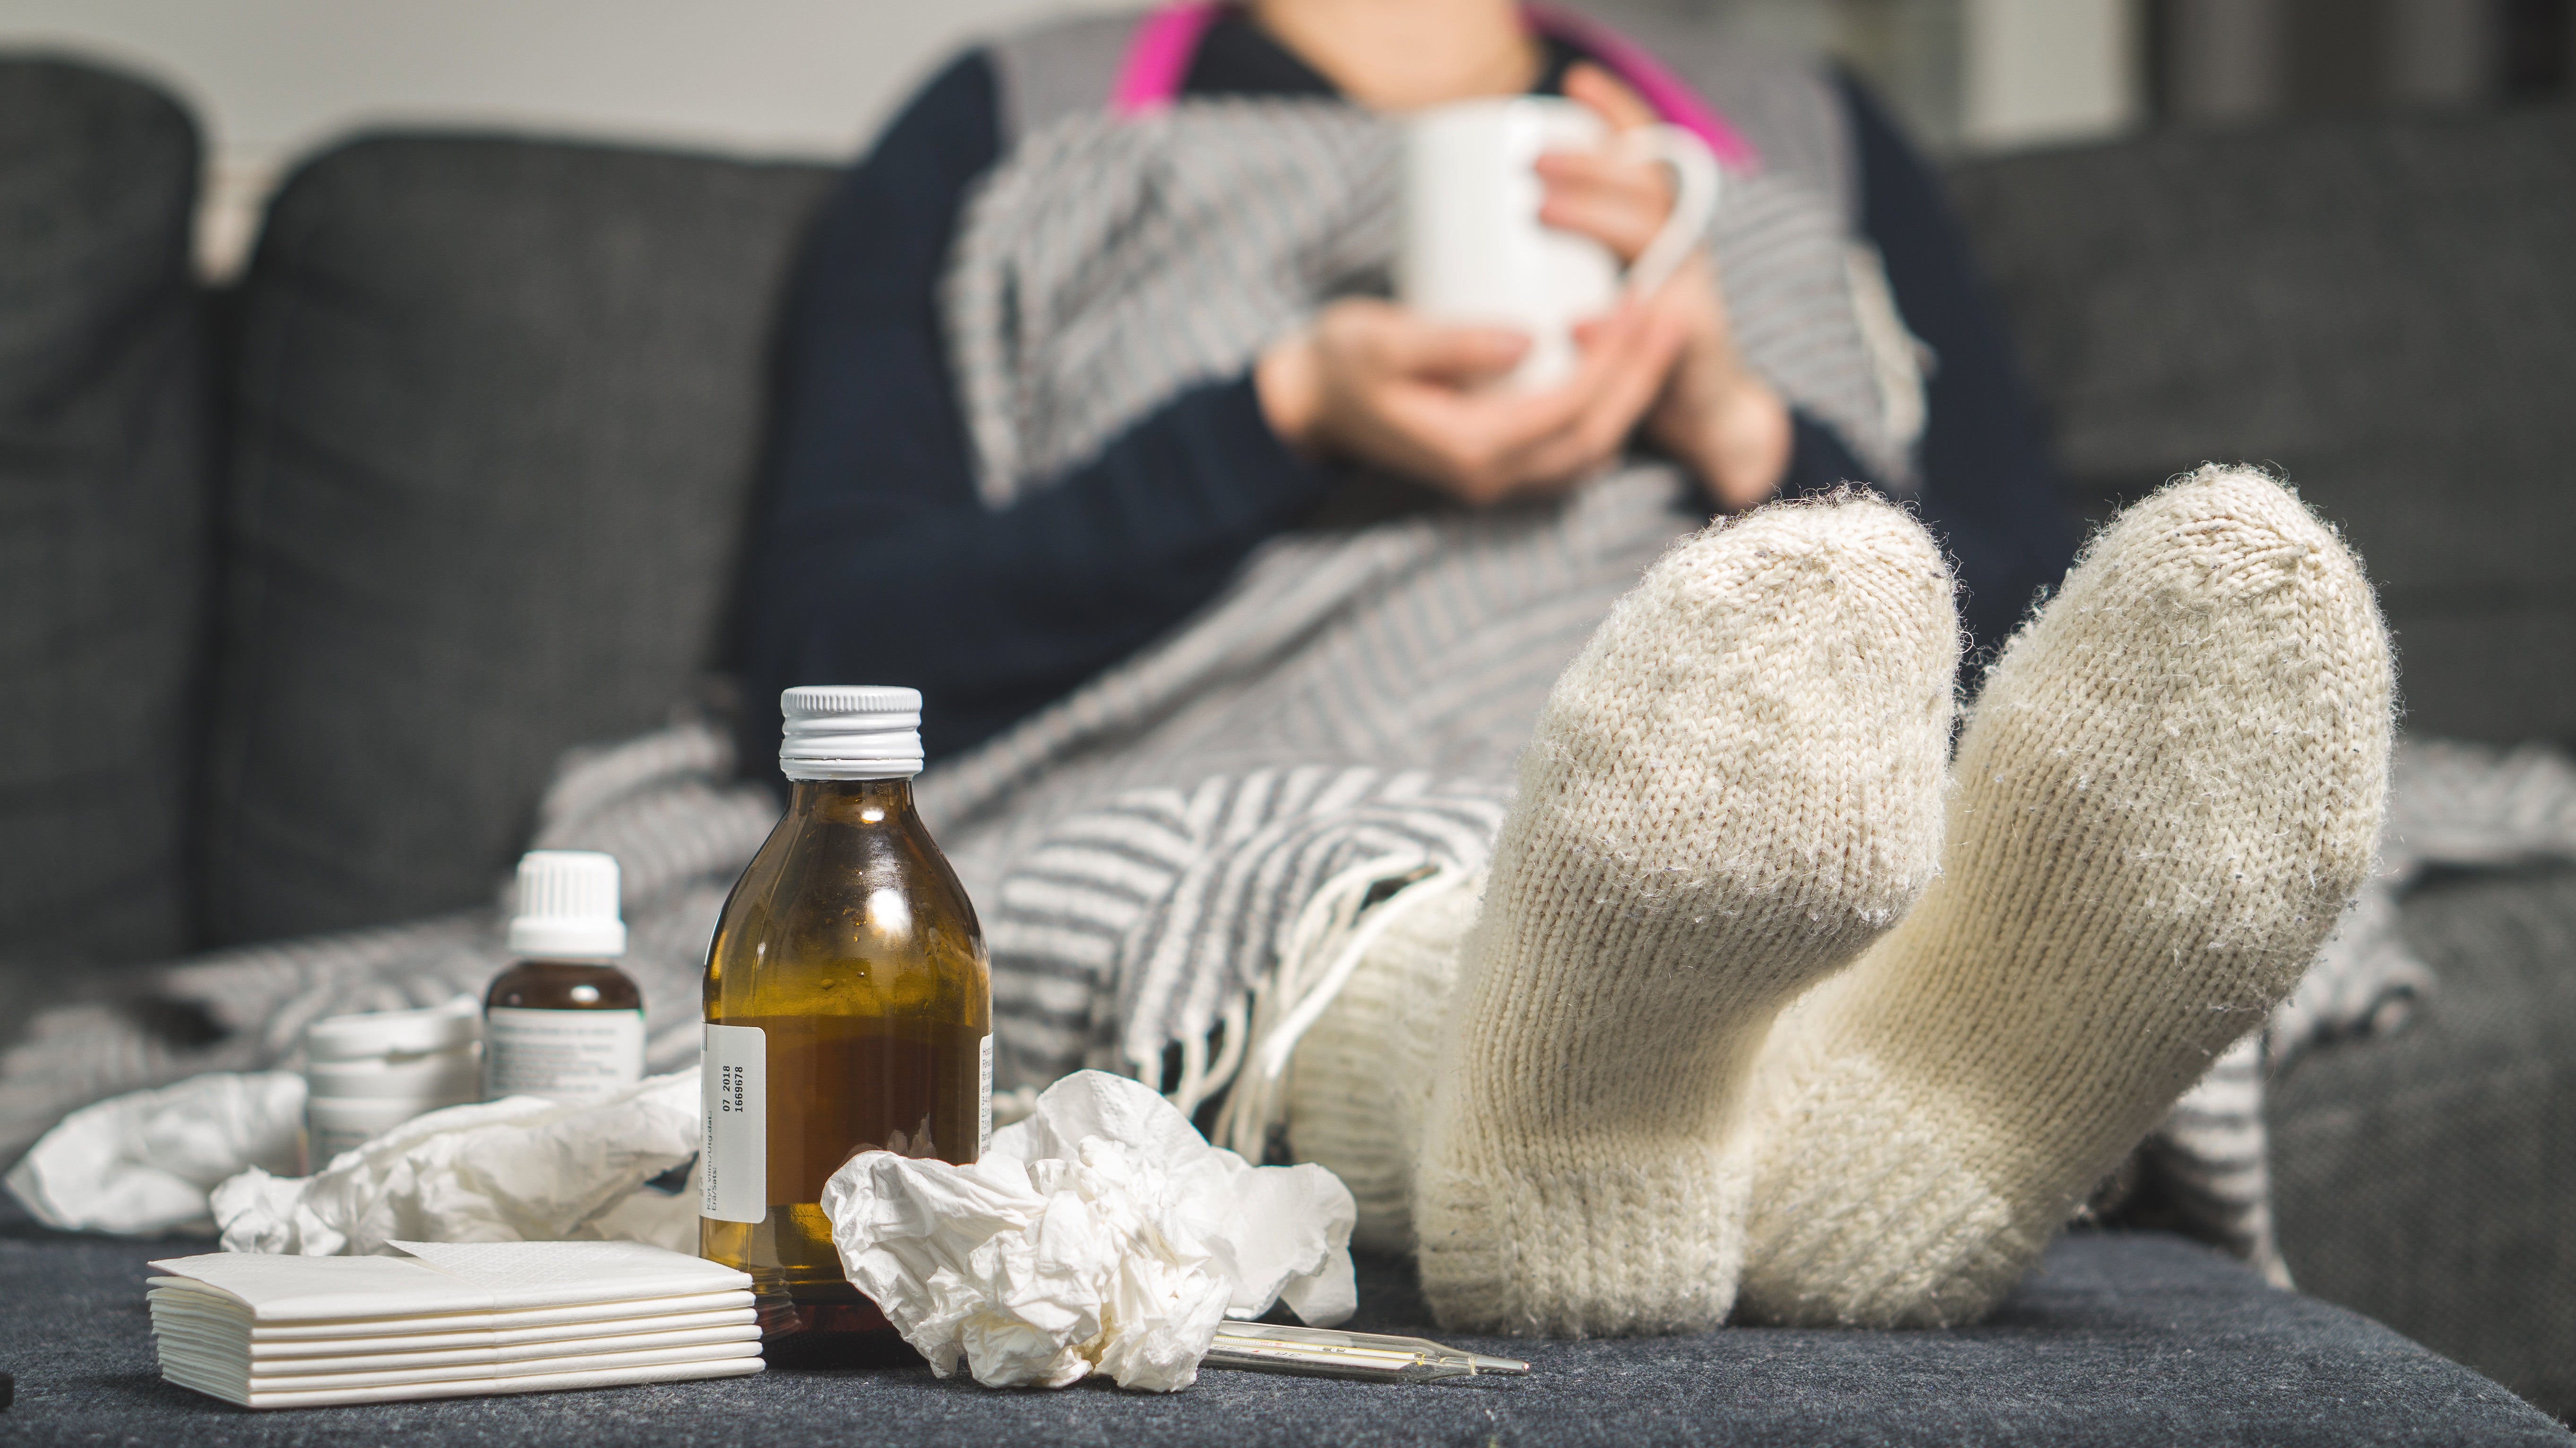 How To Harness The Placebo Effect When You Have A Cold